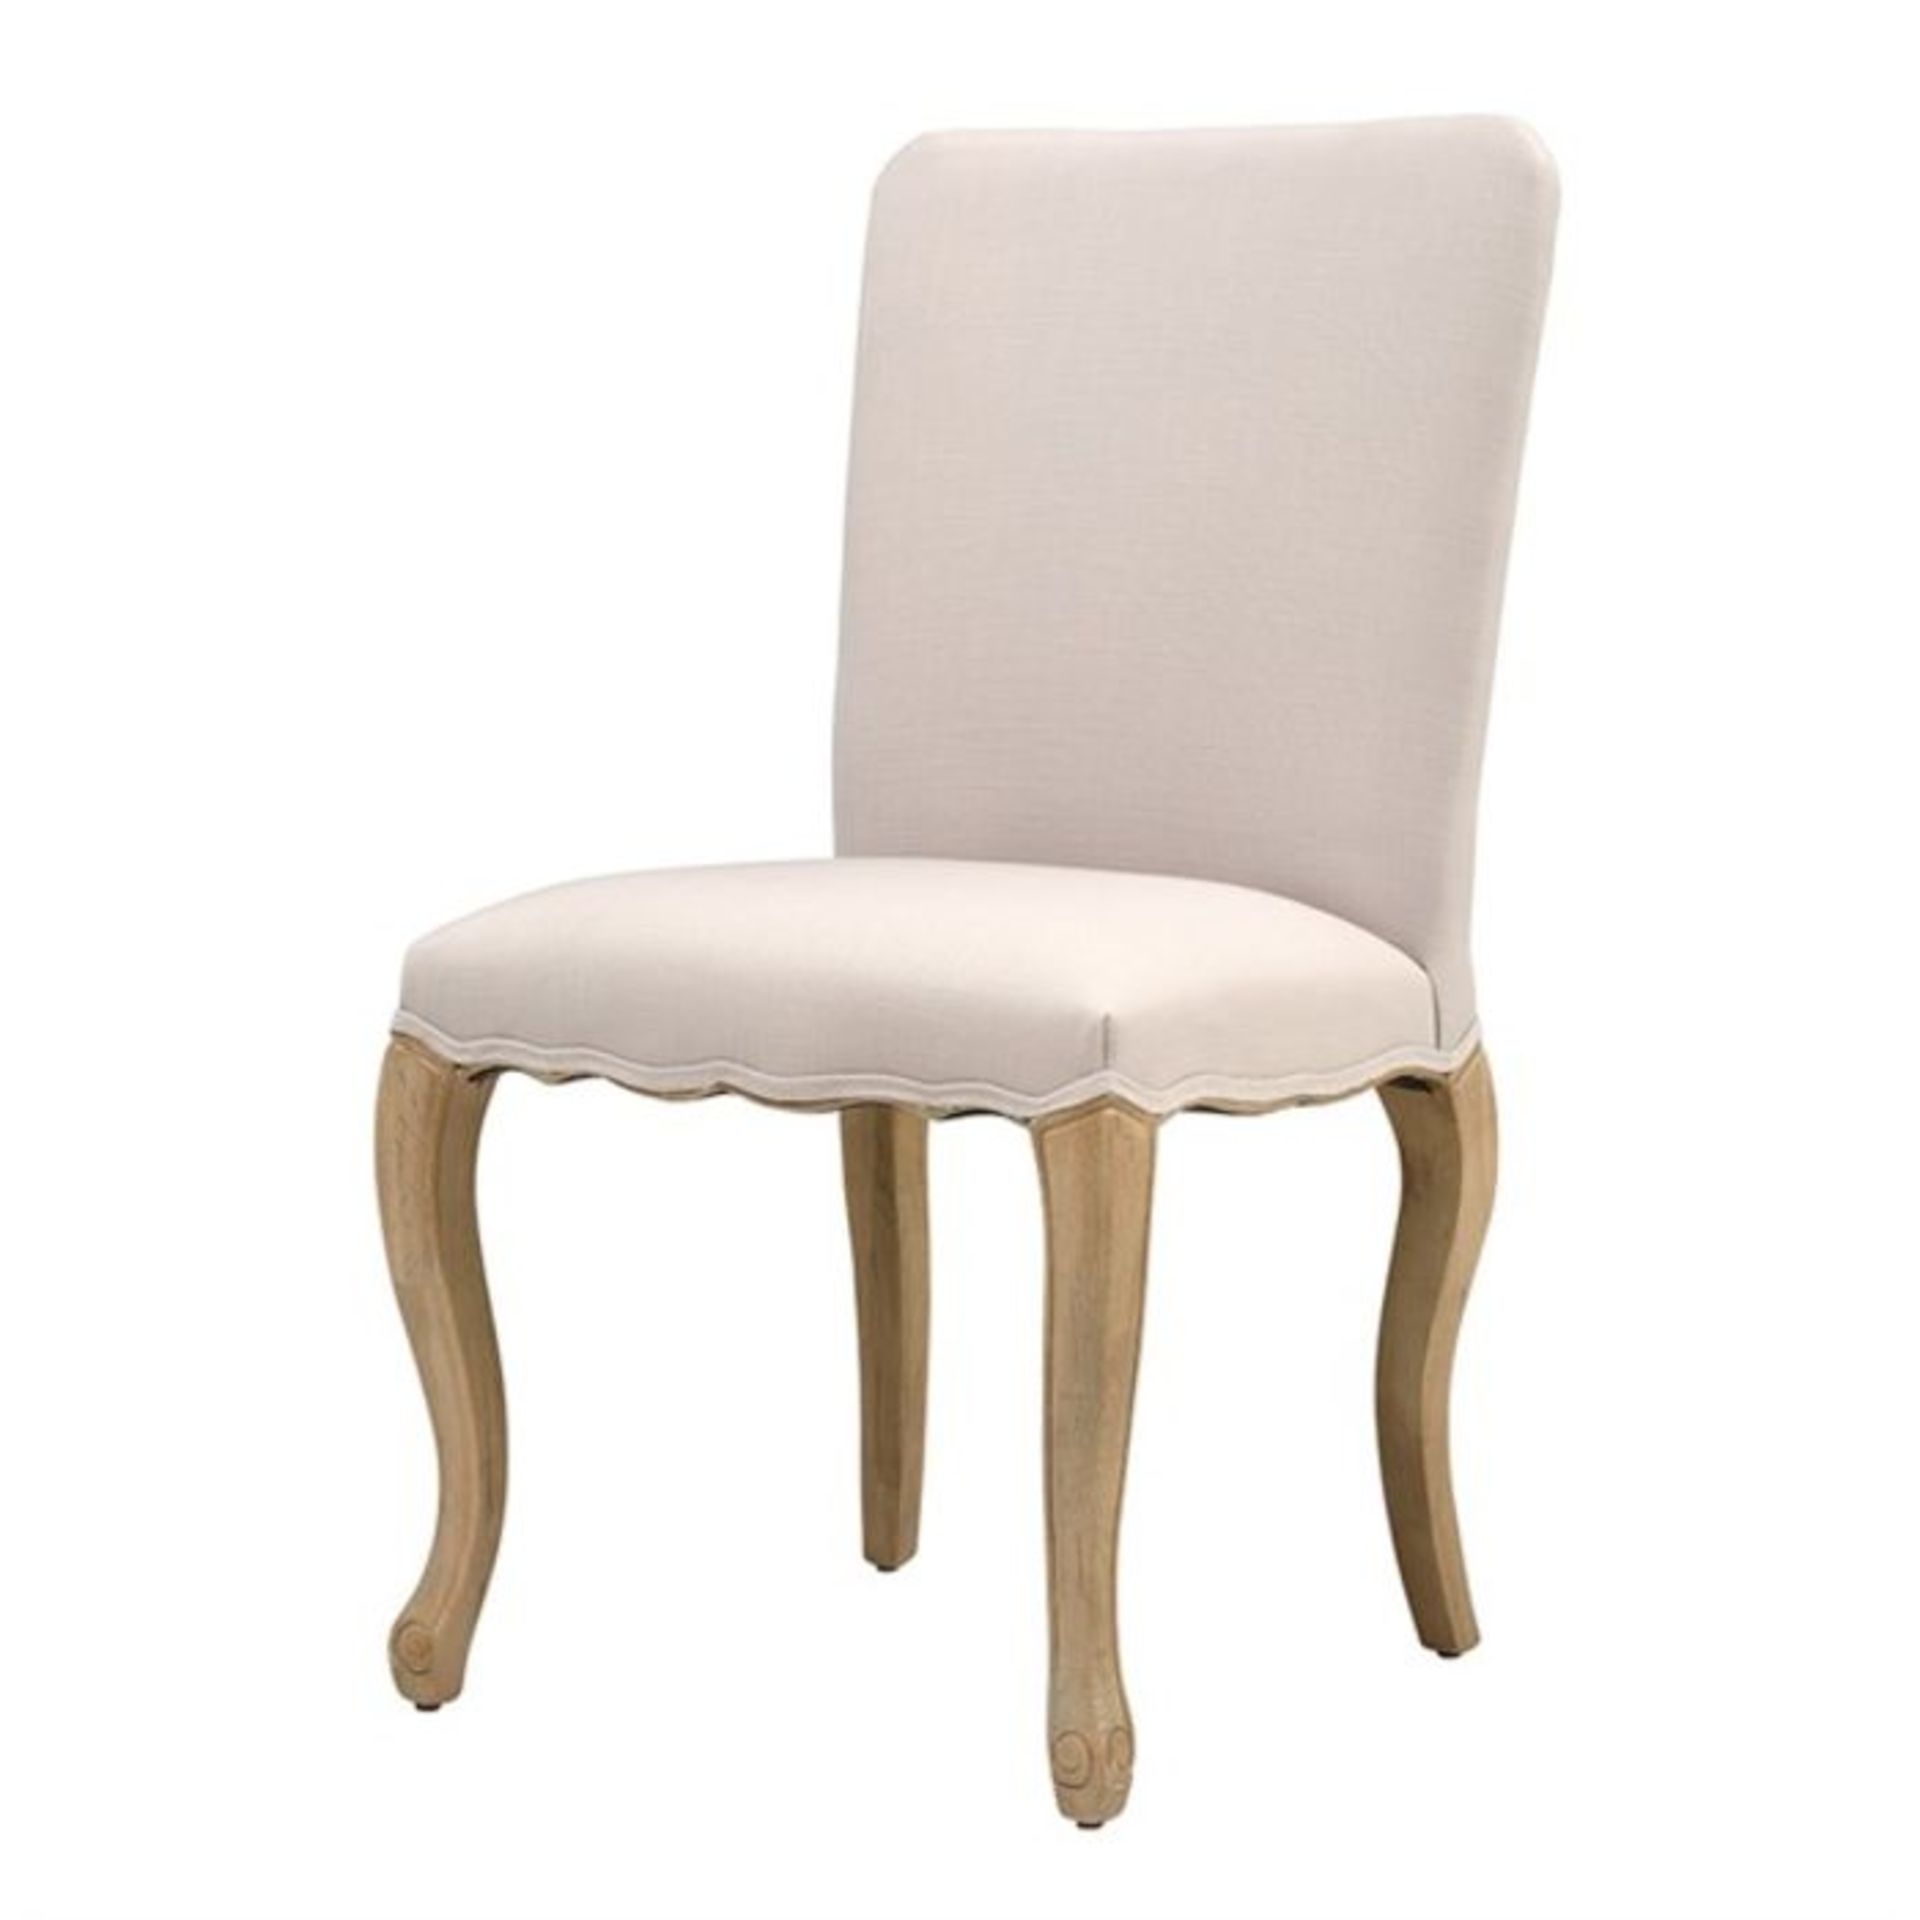 Cotswold Company Camille Limewash Oak Stone Linen Dining Chair RRP 275.00 Grade BC ref 1641 - Image 6 of 8